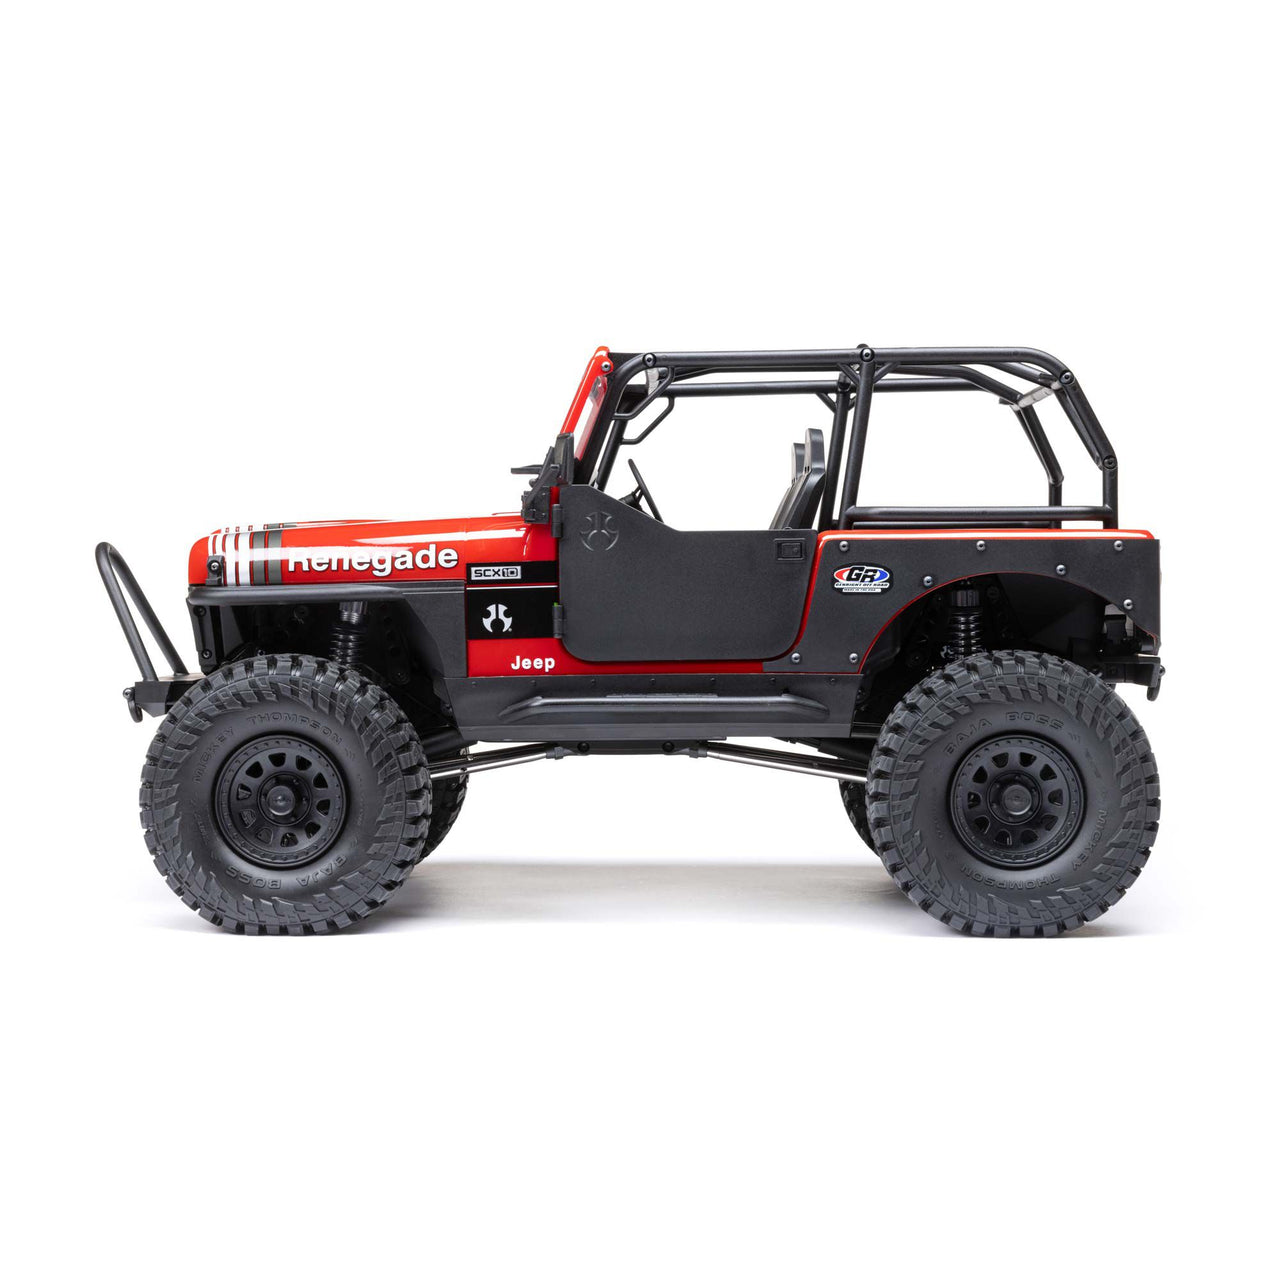 AXI03008T1 Axial 1/10 SCX10 III Jeep CJ-7 4WD Brushed RTR, Red